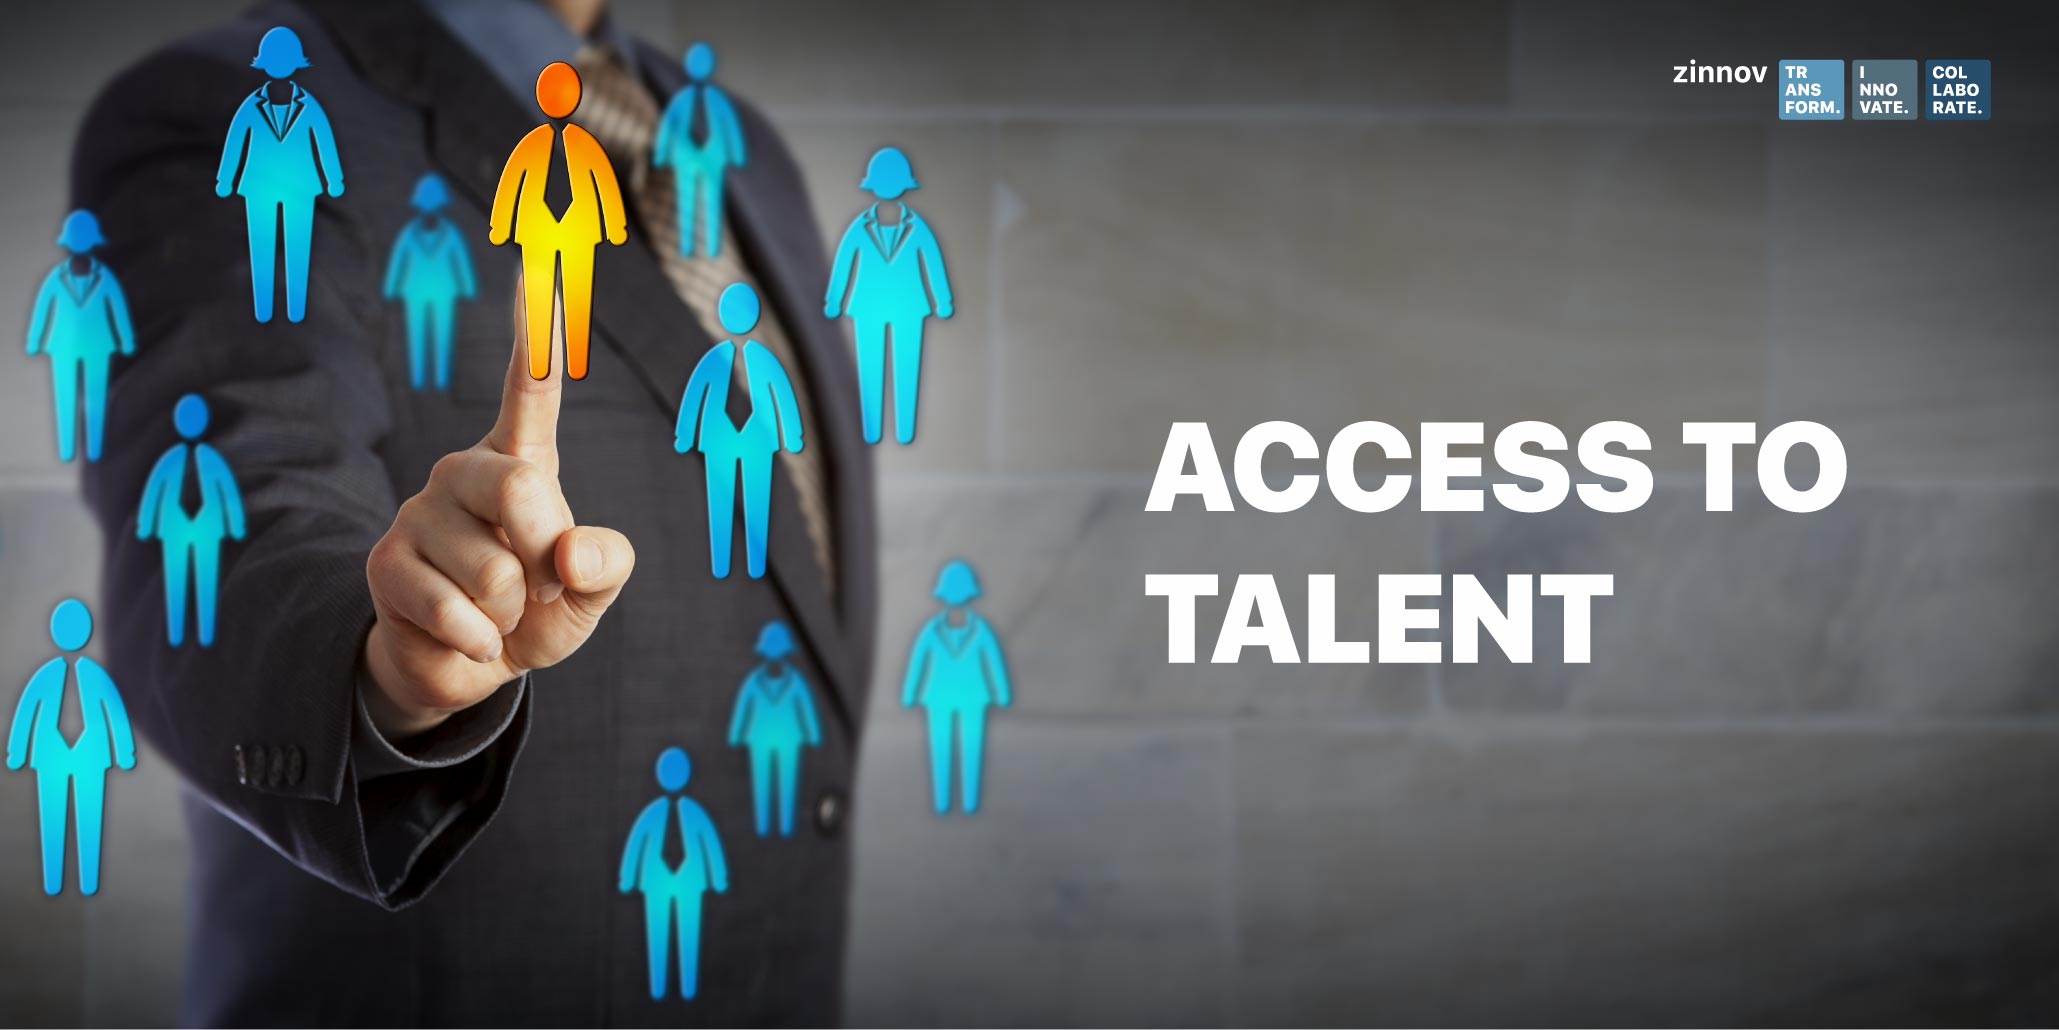 Access to talent